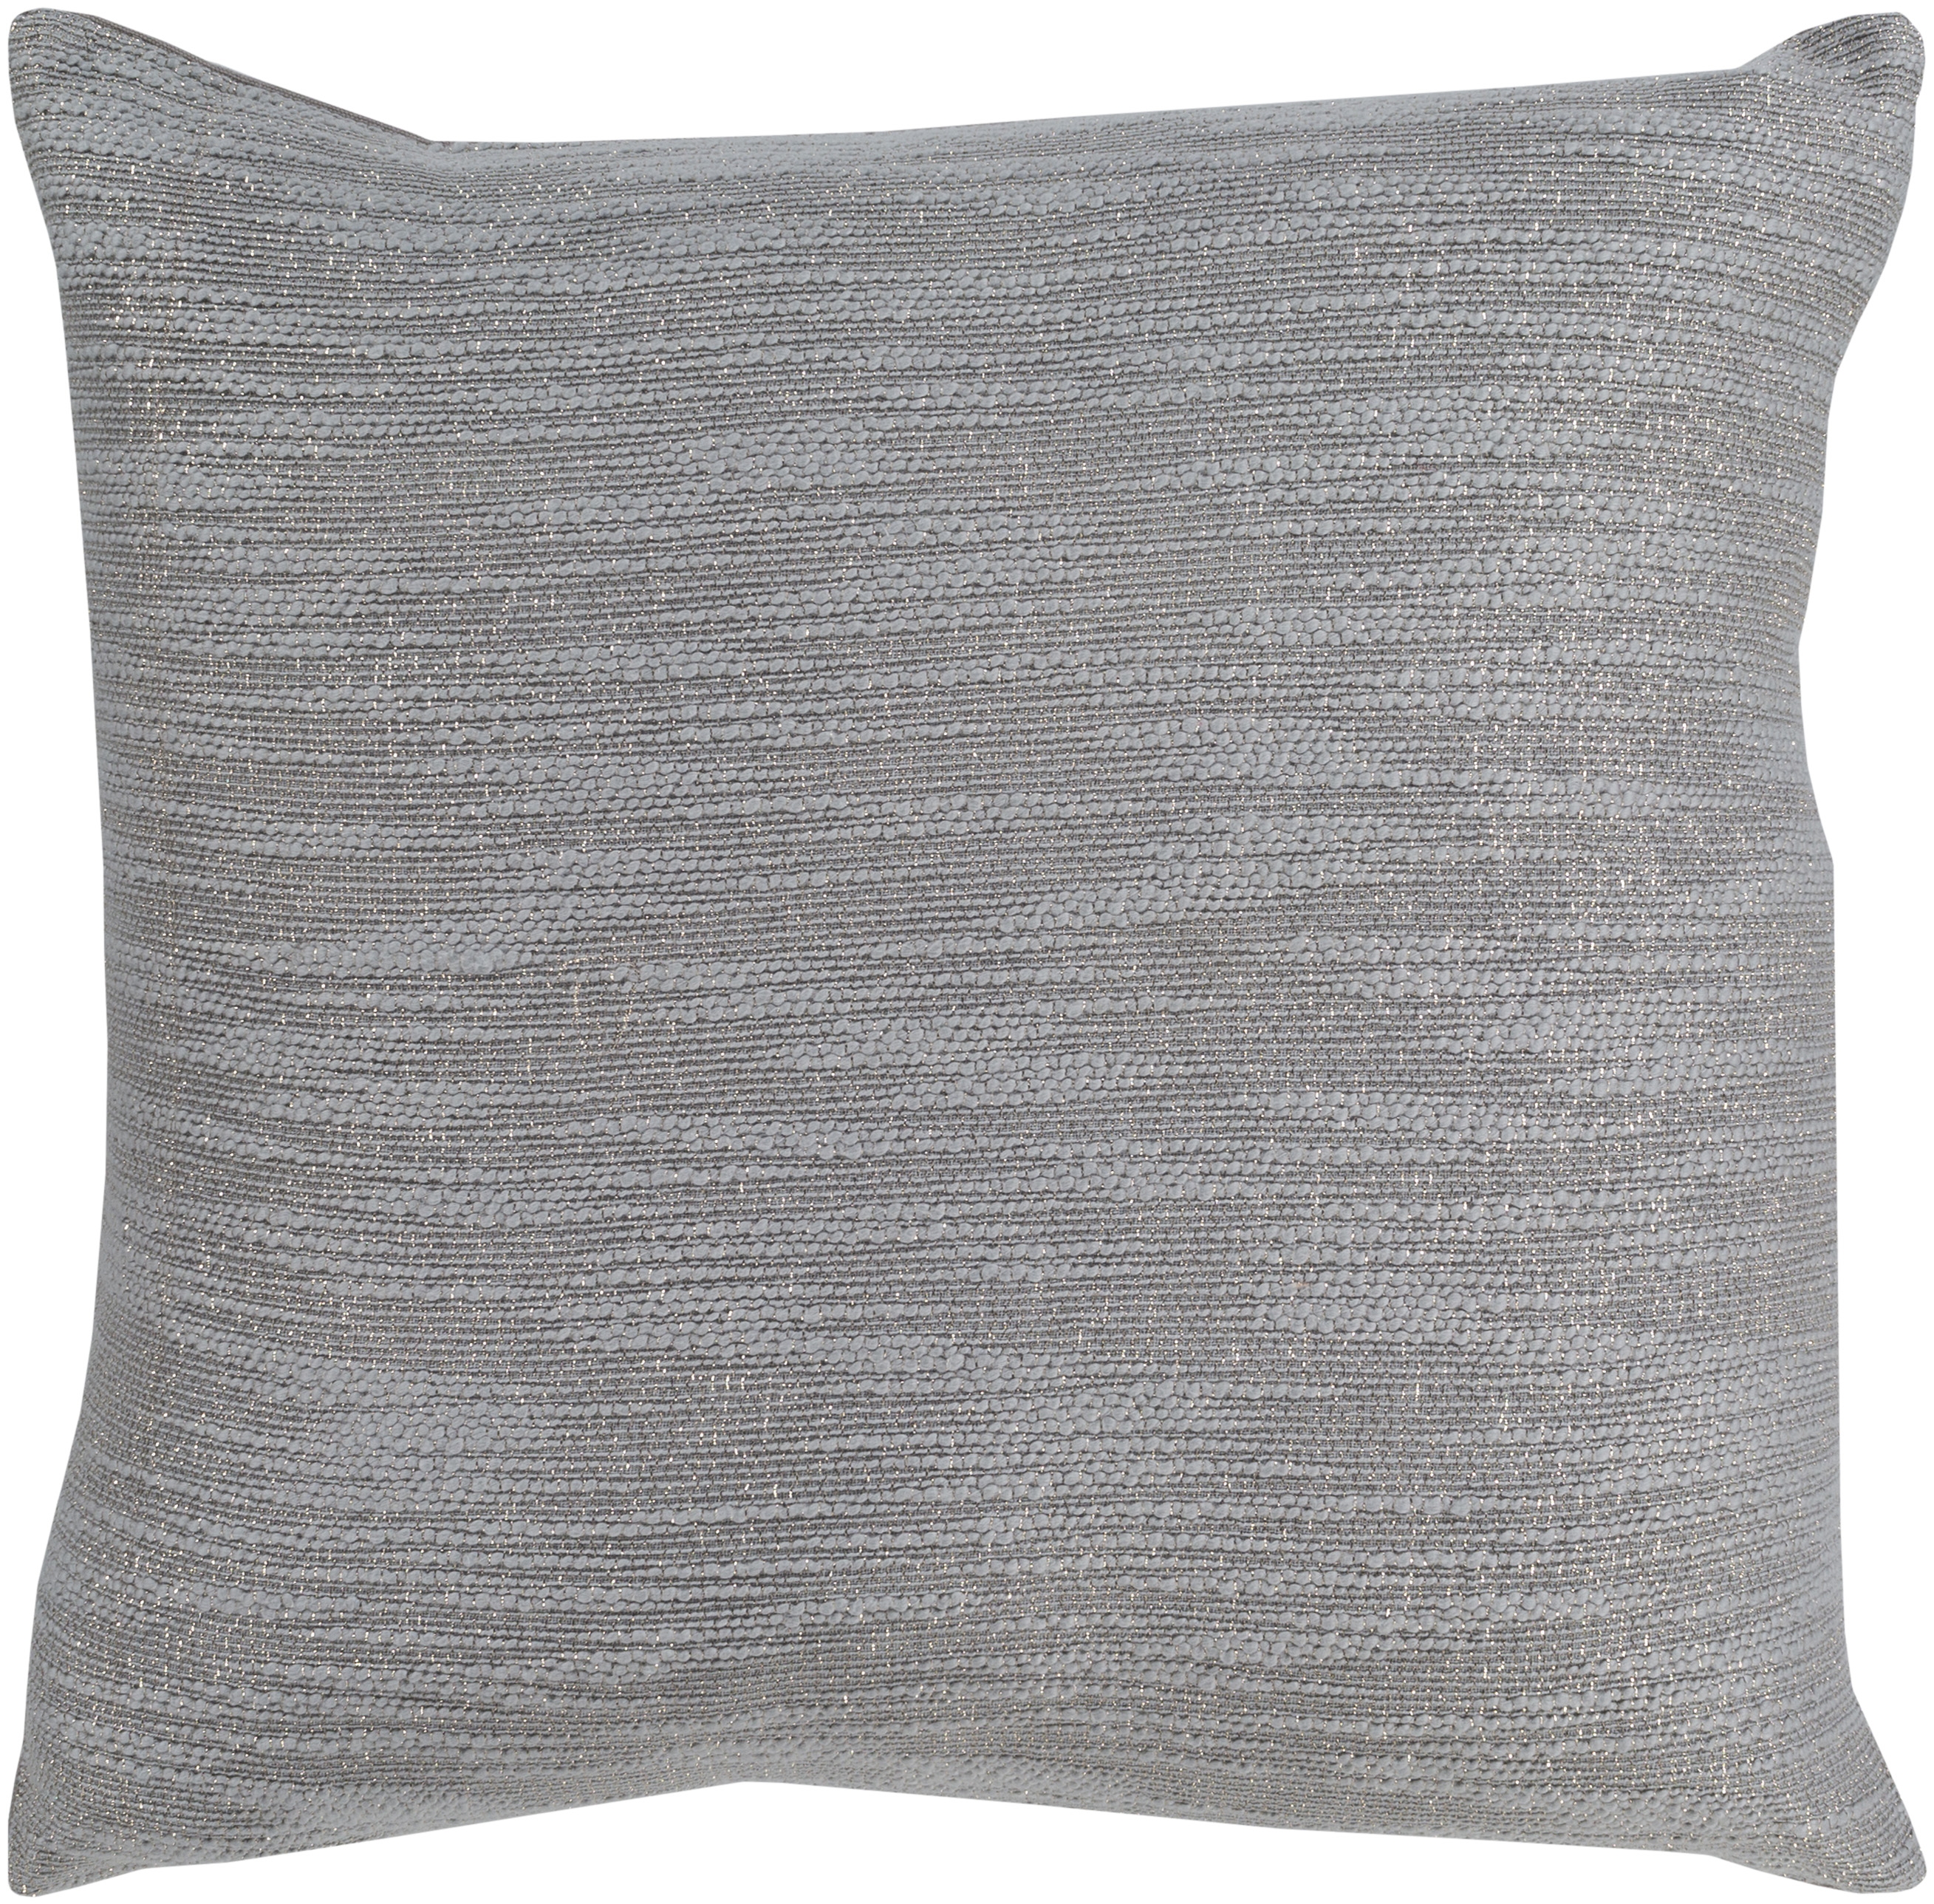 Purist Throw Pillow, 20" x 20", with down insert - Image 0